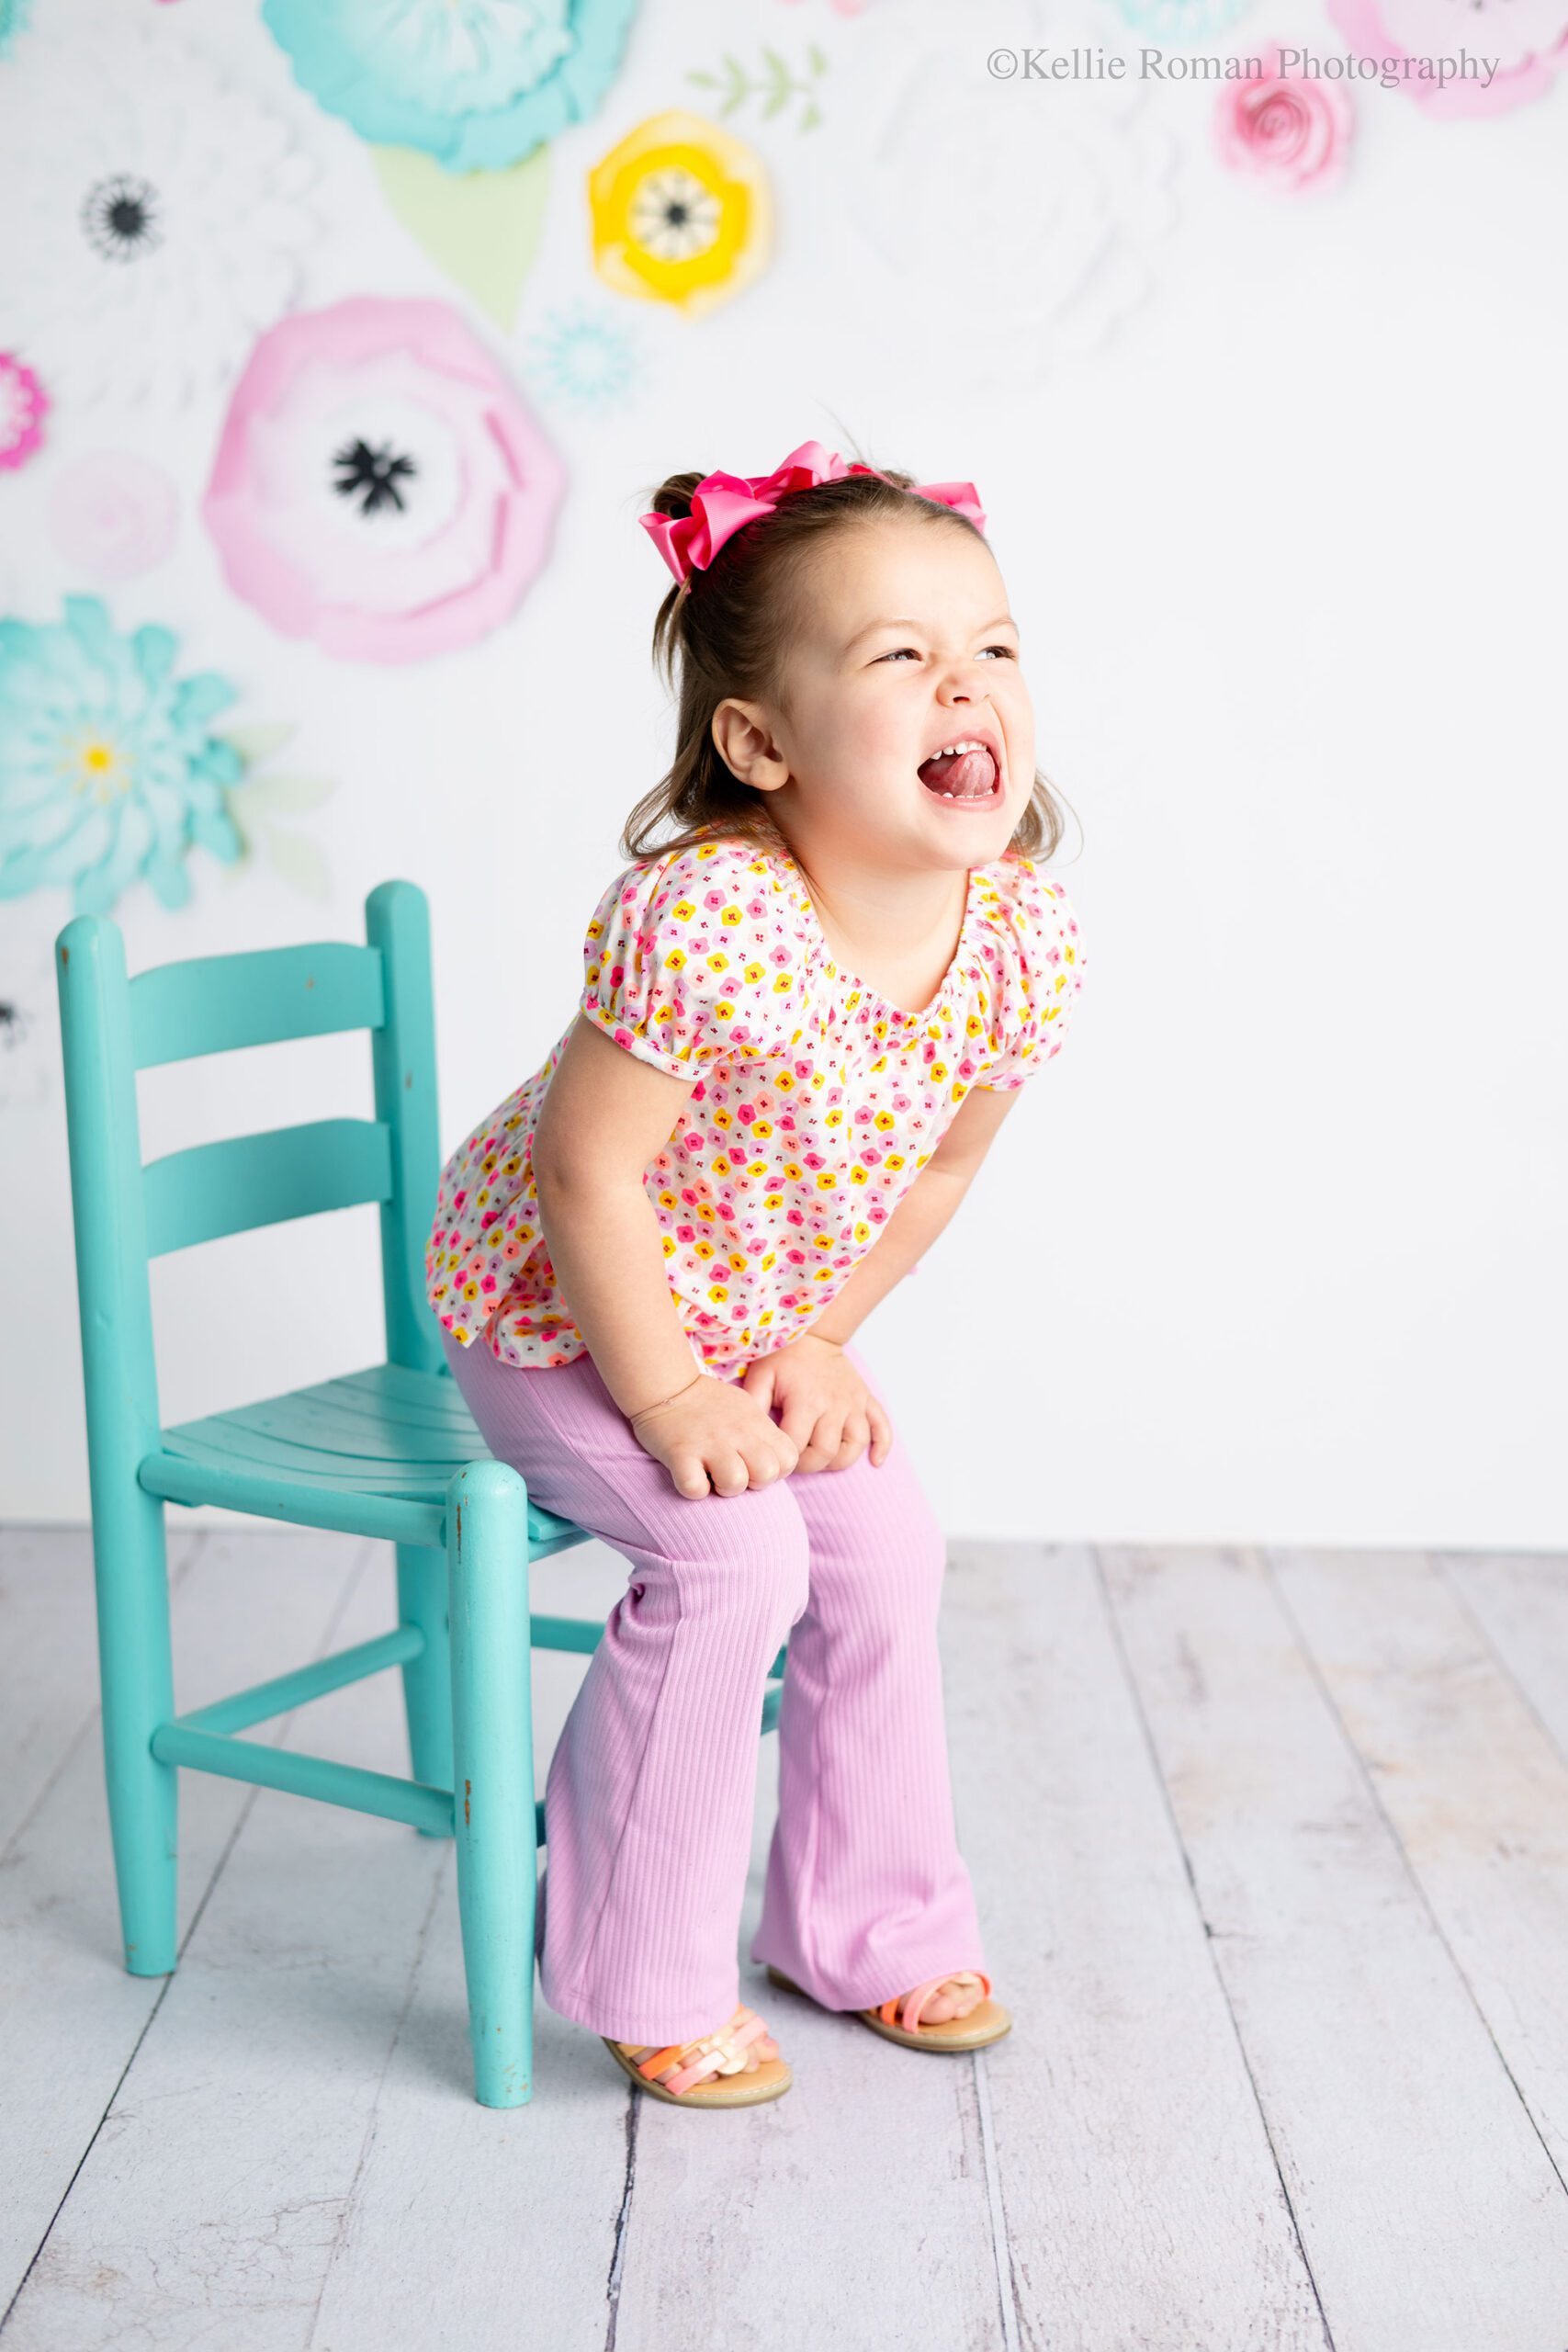 photographer near me. three year old girl is looking off to the side making a silly face with her tongue sticking out. she has a flower shirt on with light purple pants, and pink bows in her pigtails. she's half sitting on a teal chair. the background is white with pink yellow and teal flowers. 